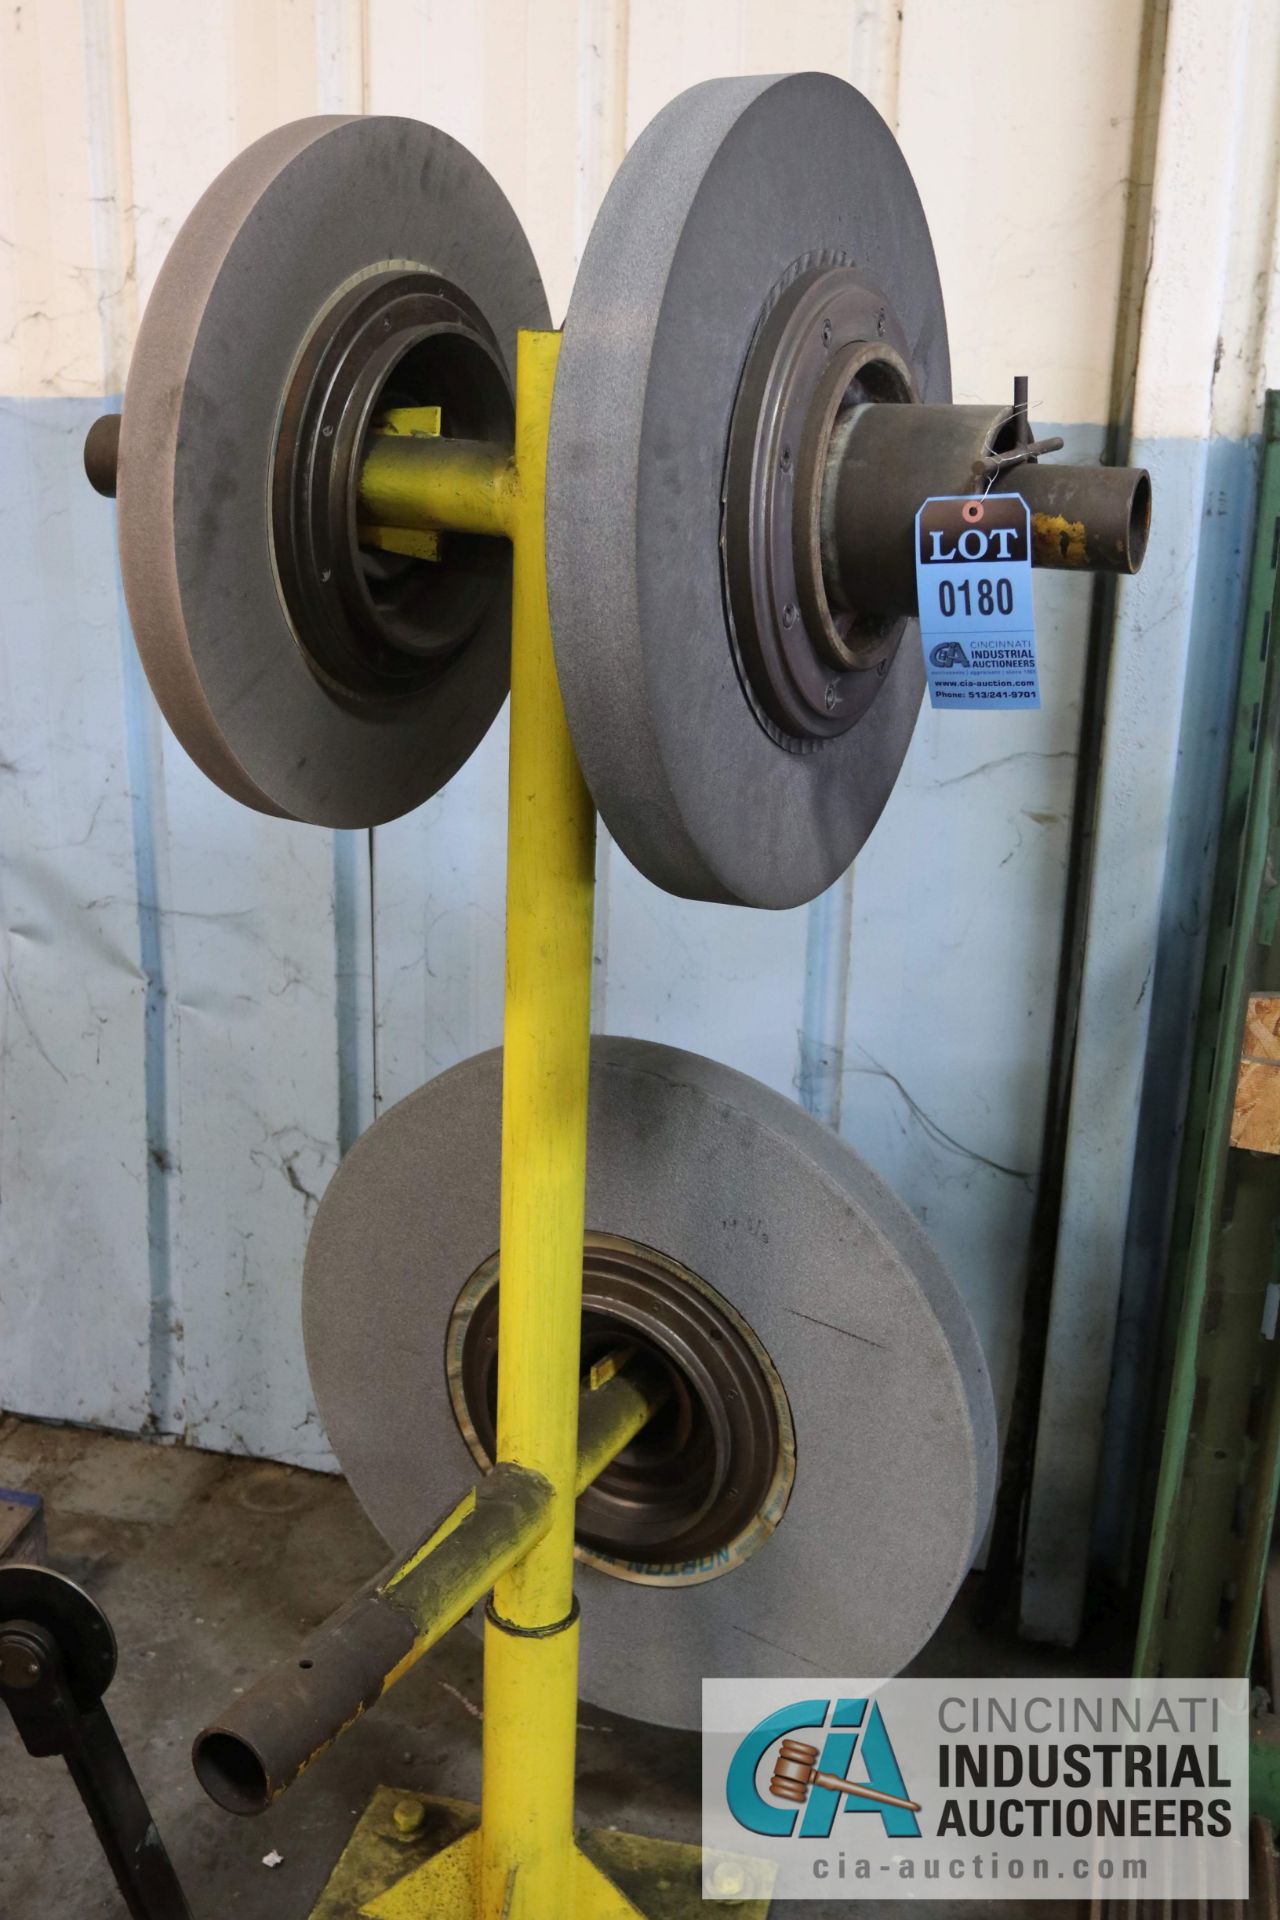 GRINDING WHEELS W/ ARBORS - $100.00 Rigging Fee Due to Onsite Rigger - Located in Bryan, Ohio